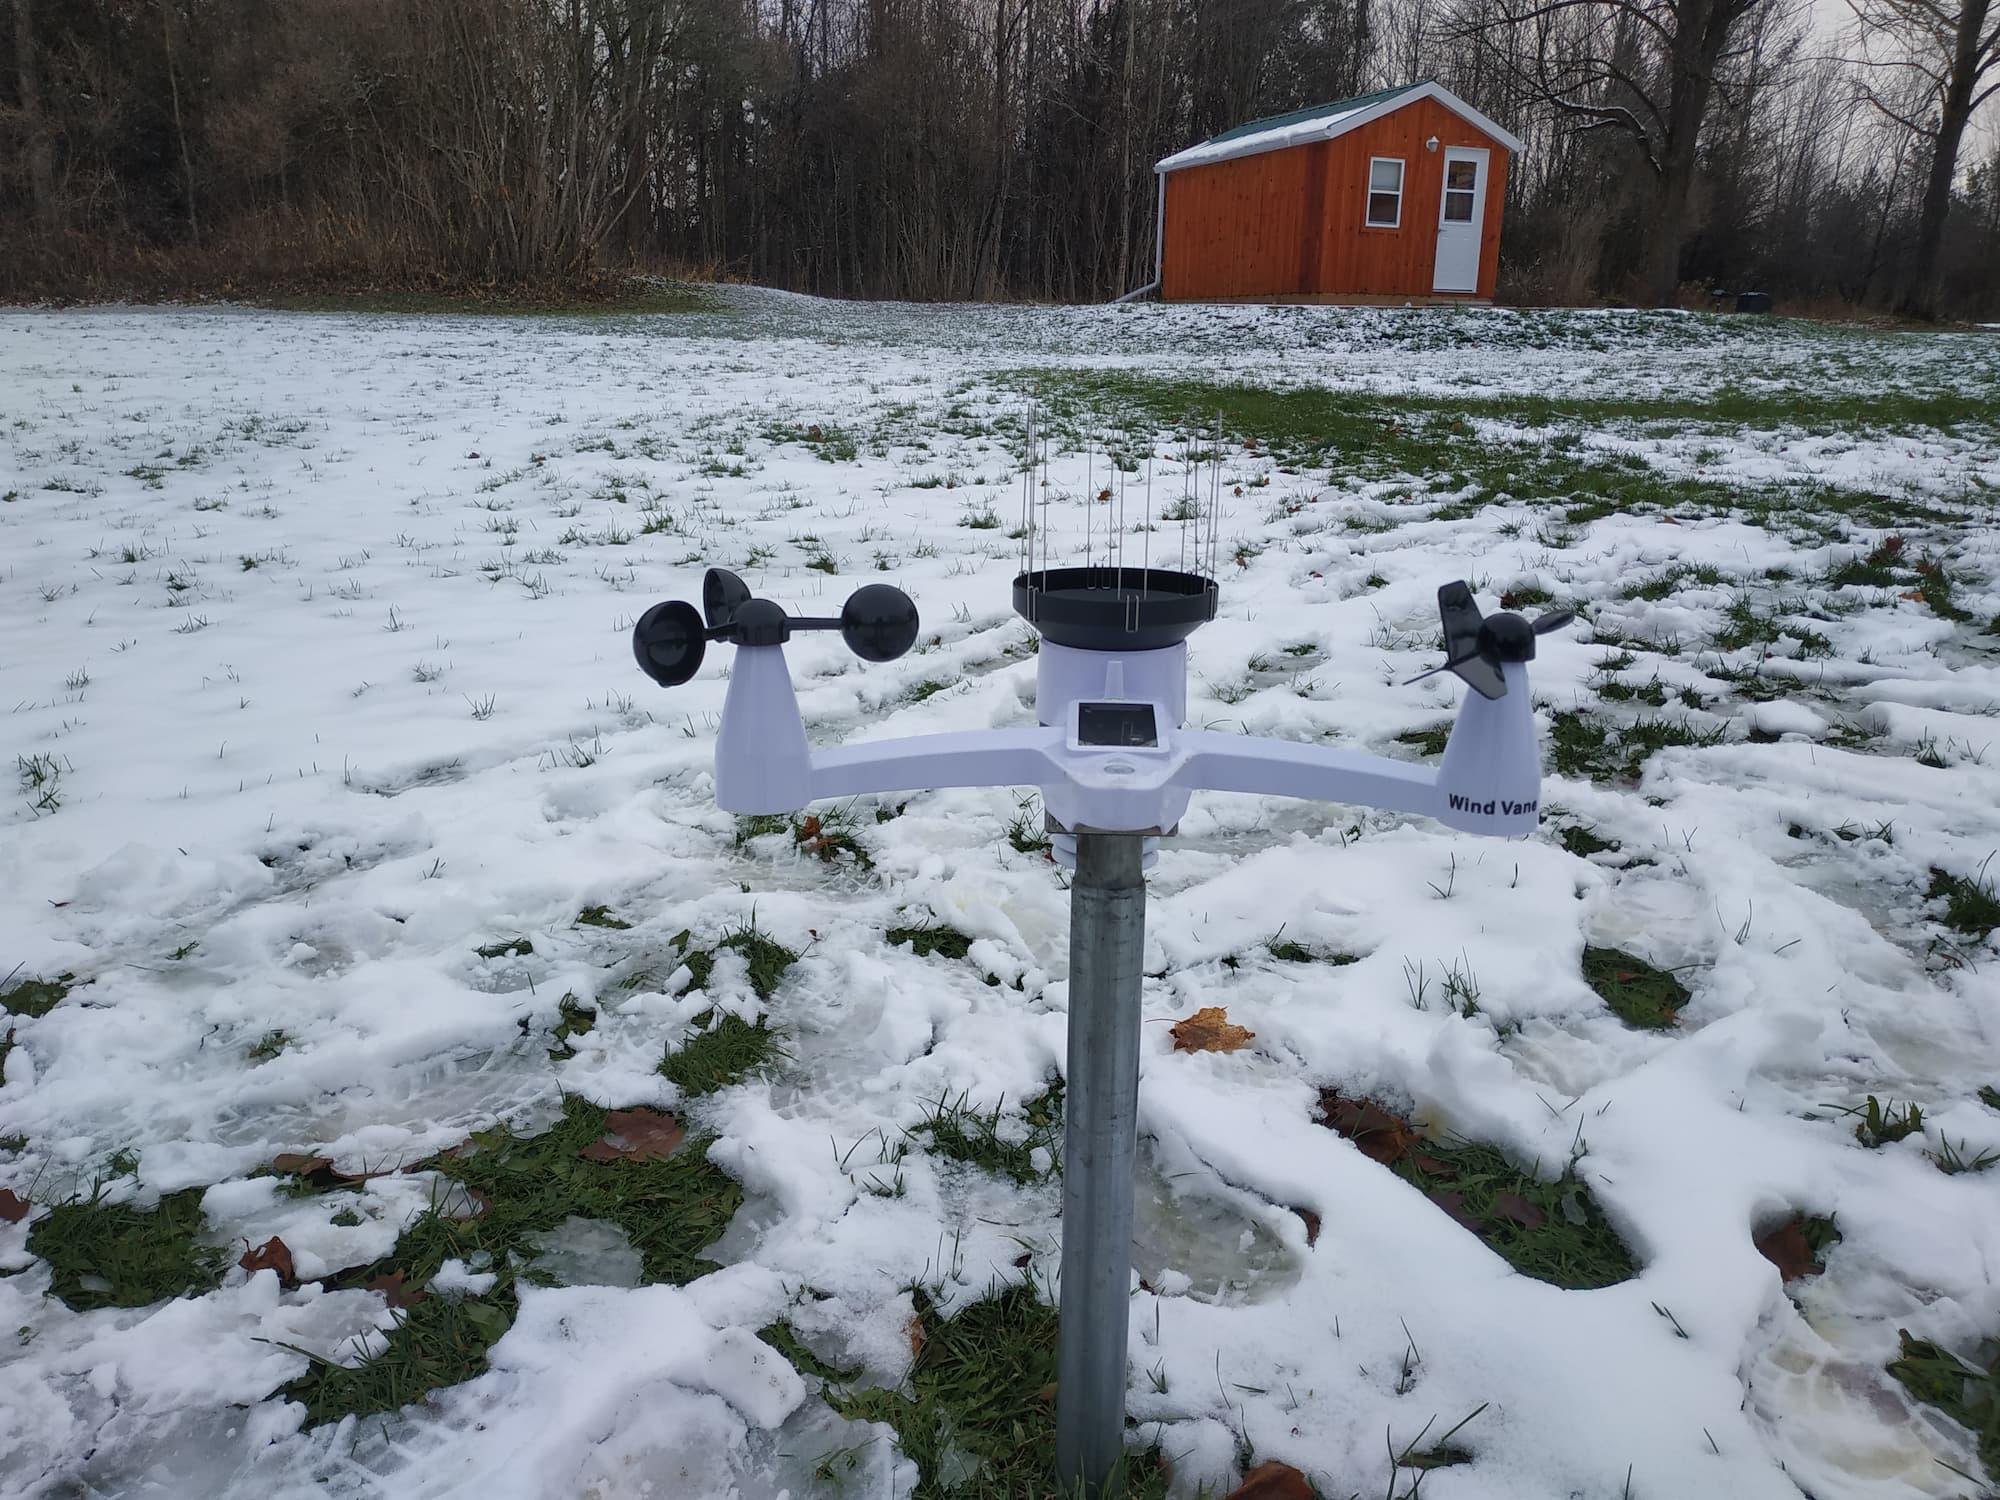 A white and black weather monitoring unit with an anemometer, rain collector, wind vane, solar panel, and other sensors is atop a short metal pole, with snow on the ground and my red office cabin in the background